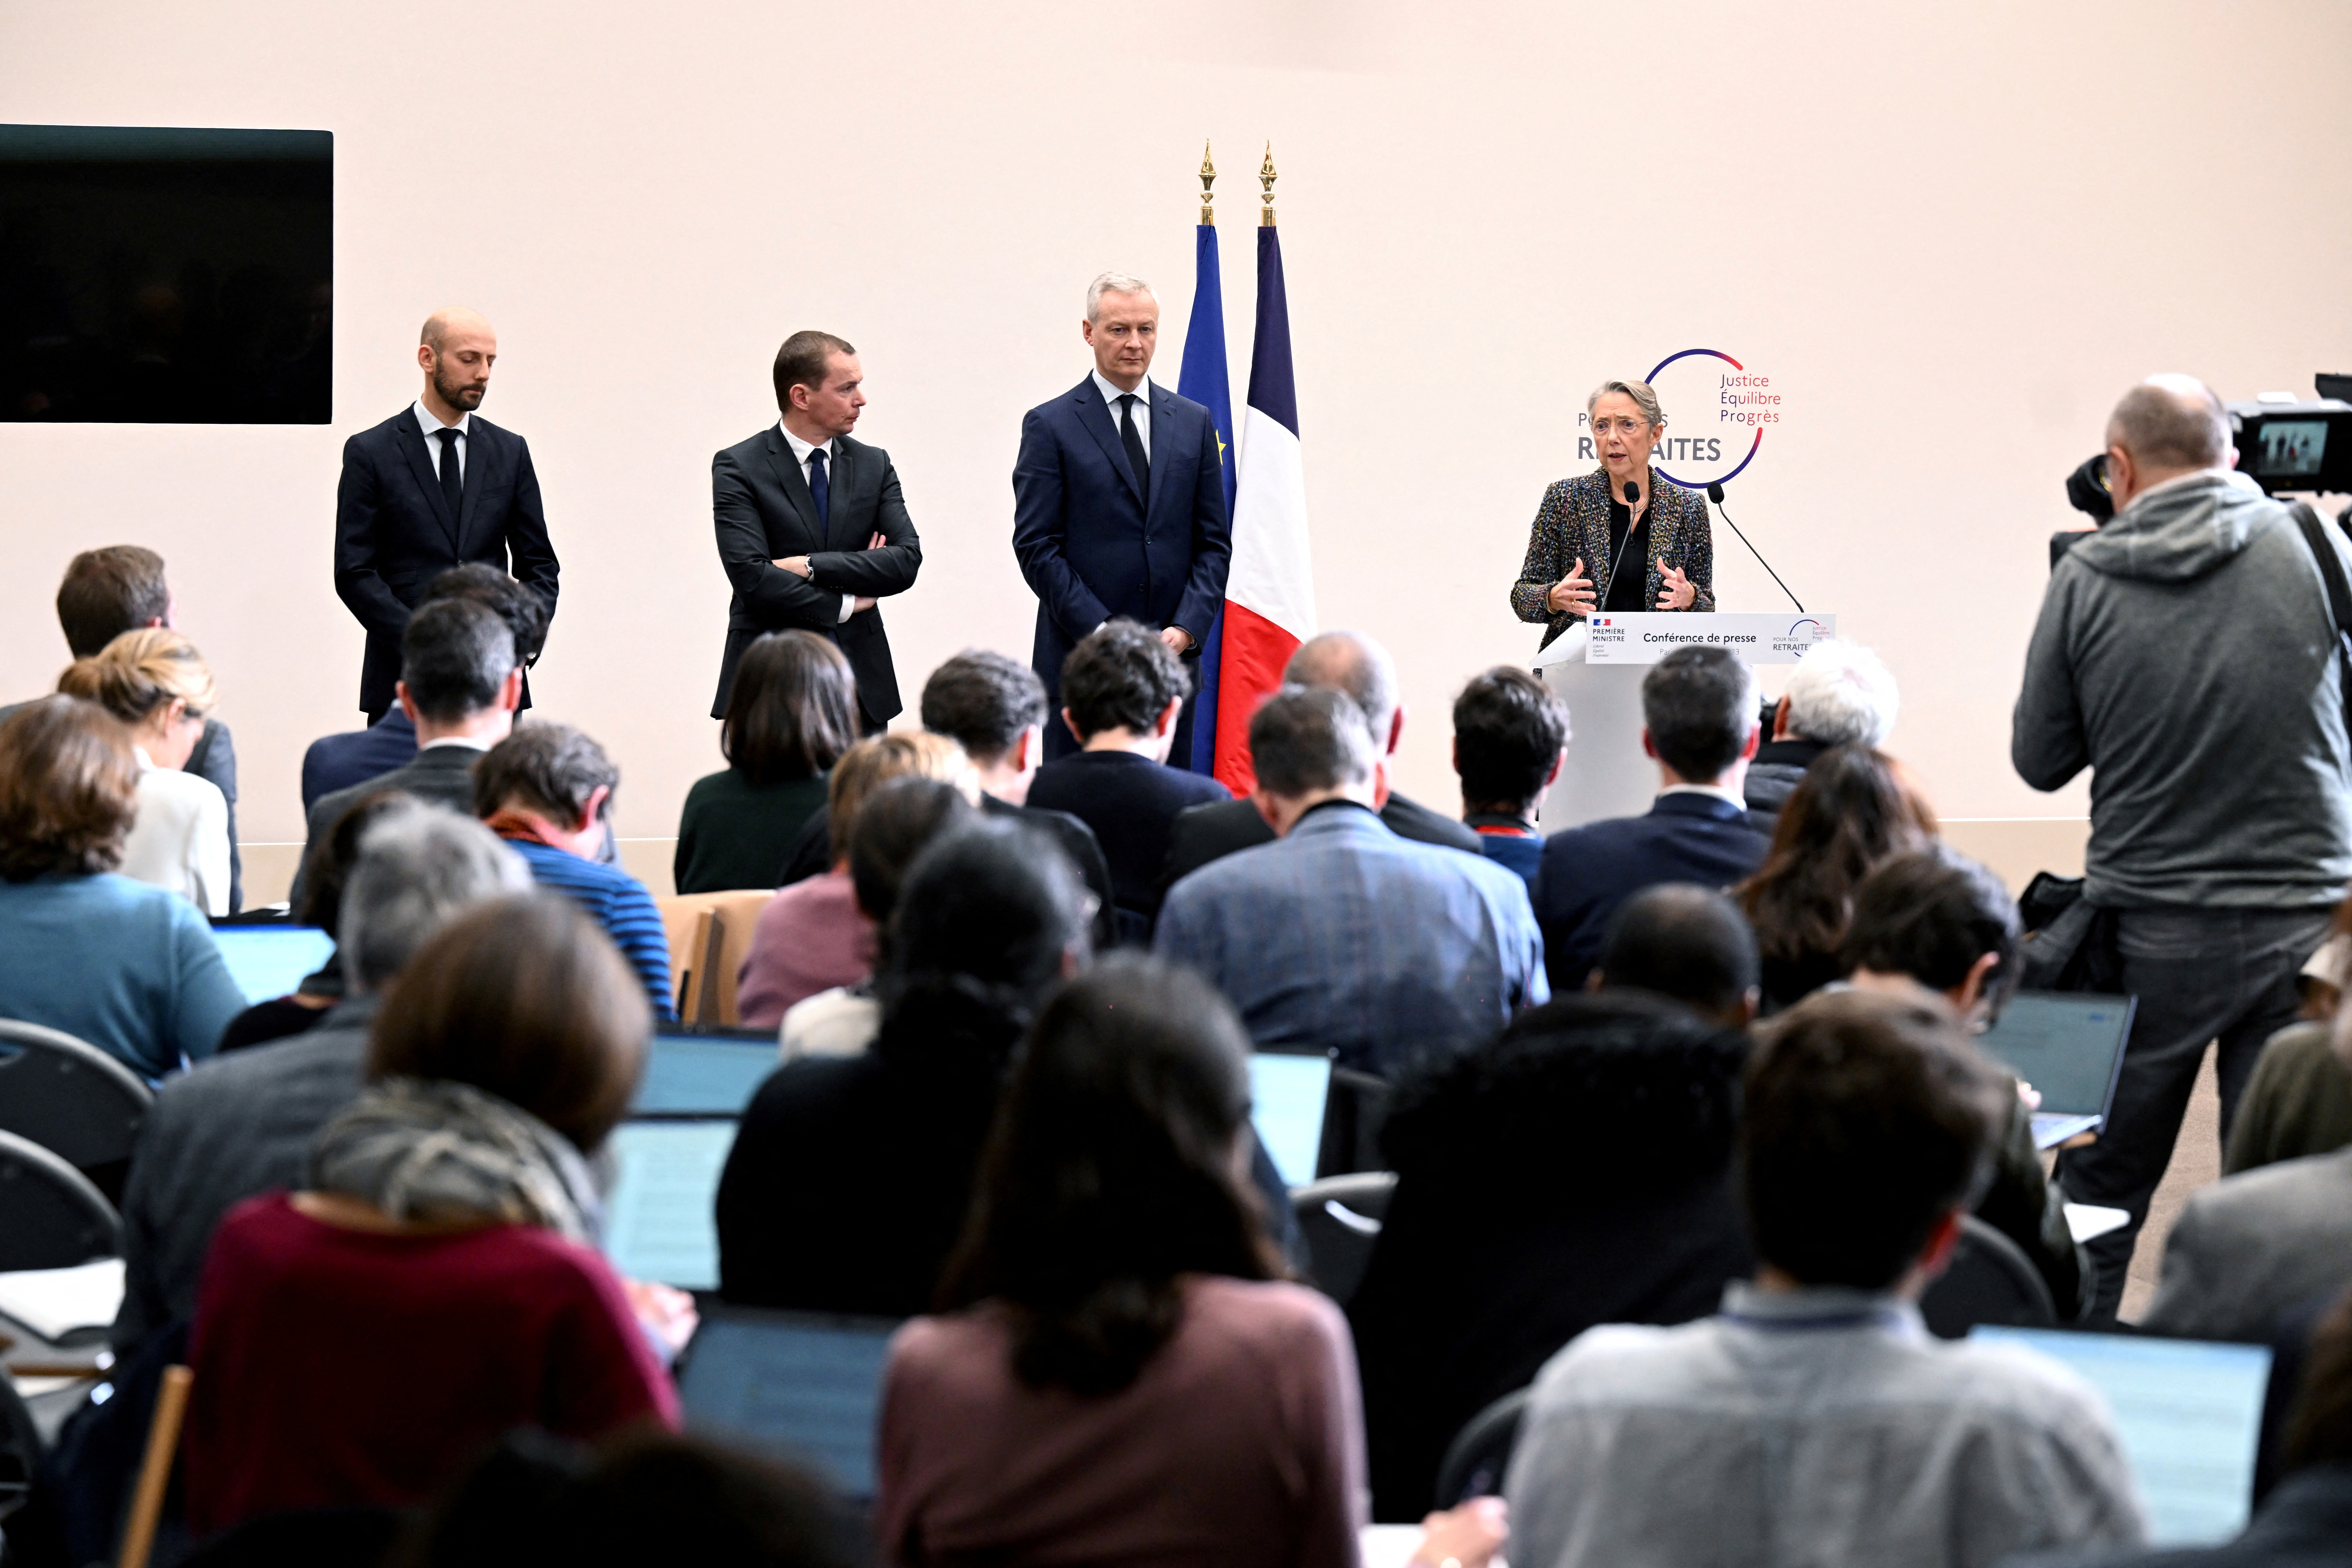 Government's plan for a pension reform presentation in Paris